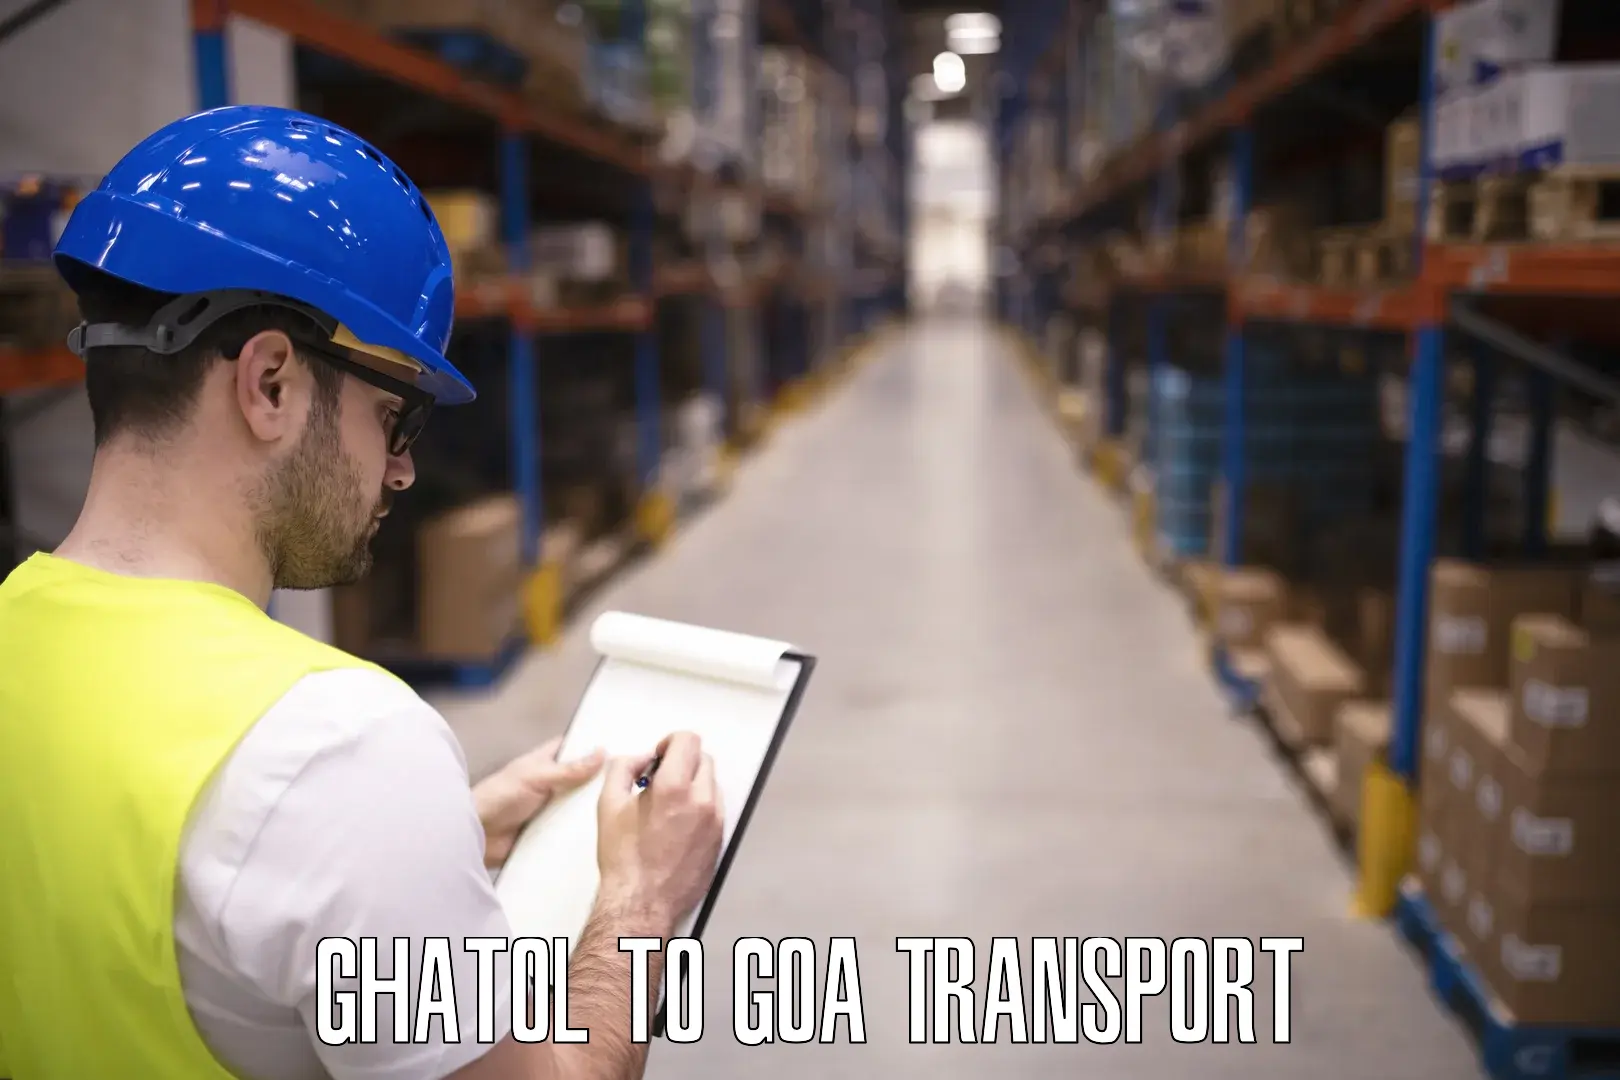 Domestic transport services Ghatol to Goa